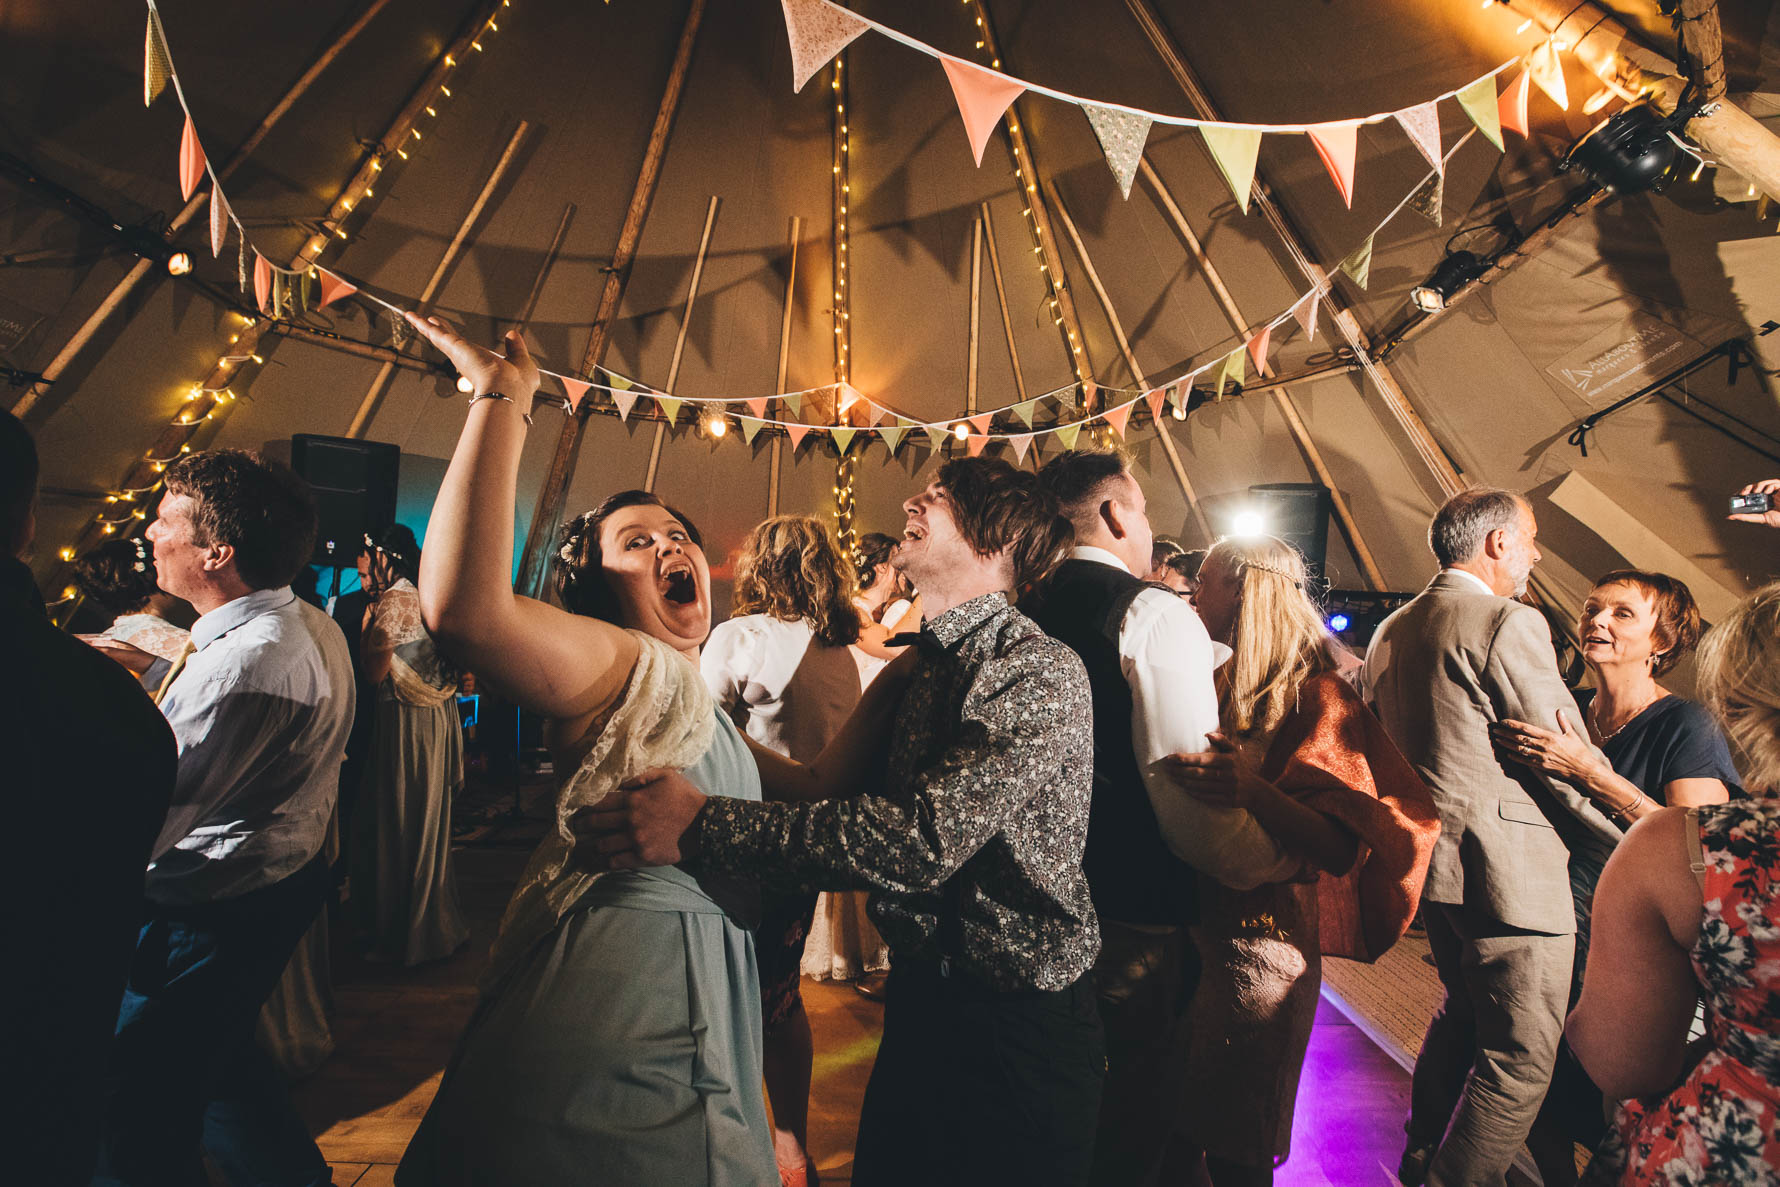 Wedding guests dancing inside a tipi with a bridesmaid with her har in the air and mouth wide open as her partner has his arms around her waist and is laughing